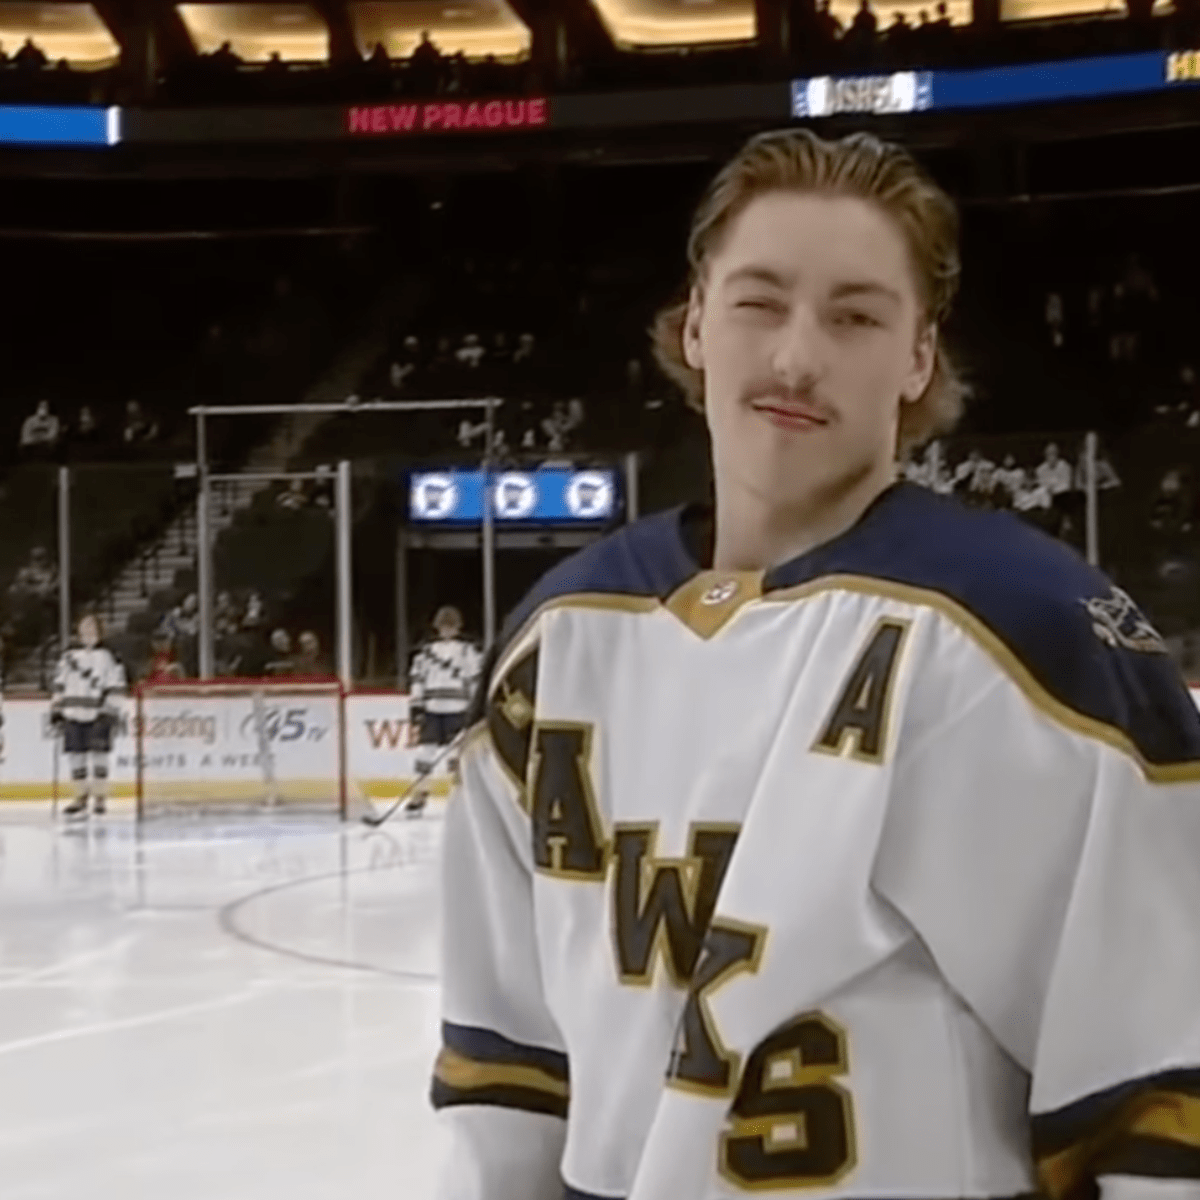 Top 5 Hockey Hair Styles From the 2023 Minnesota State High School